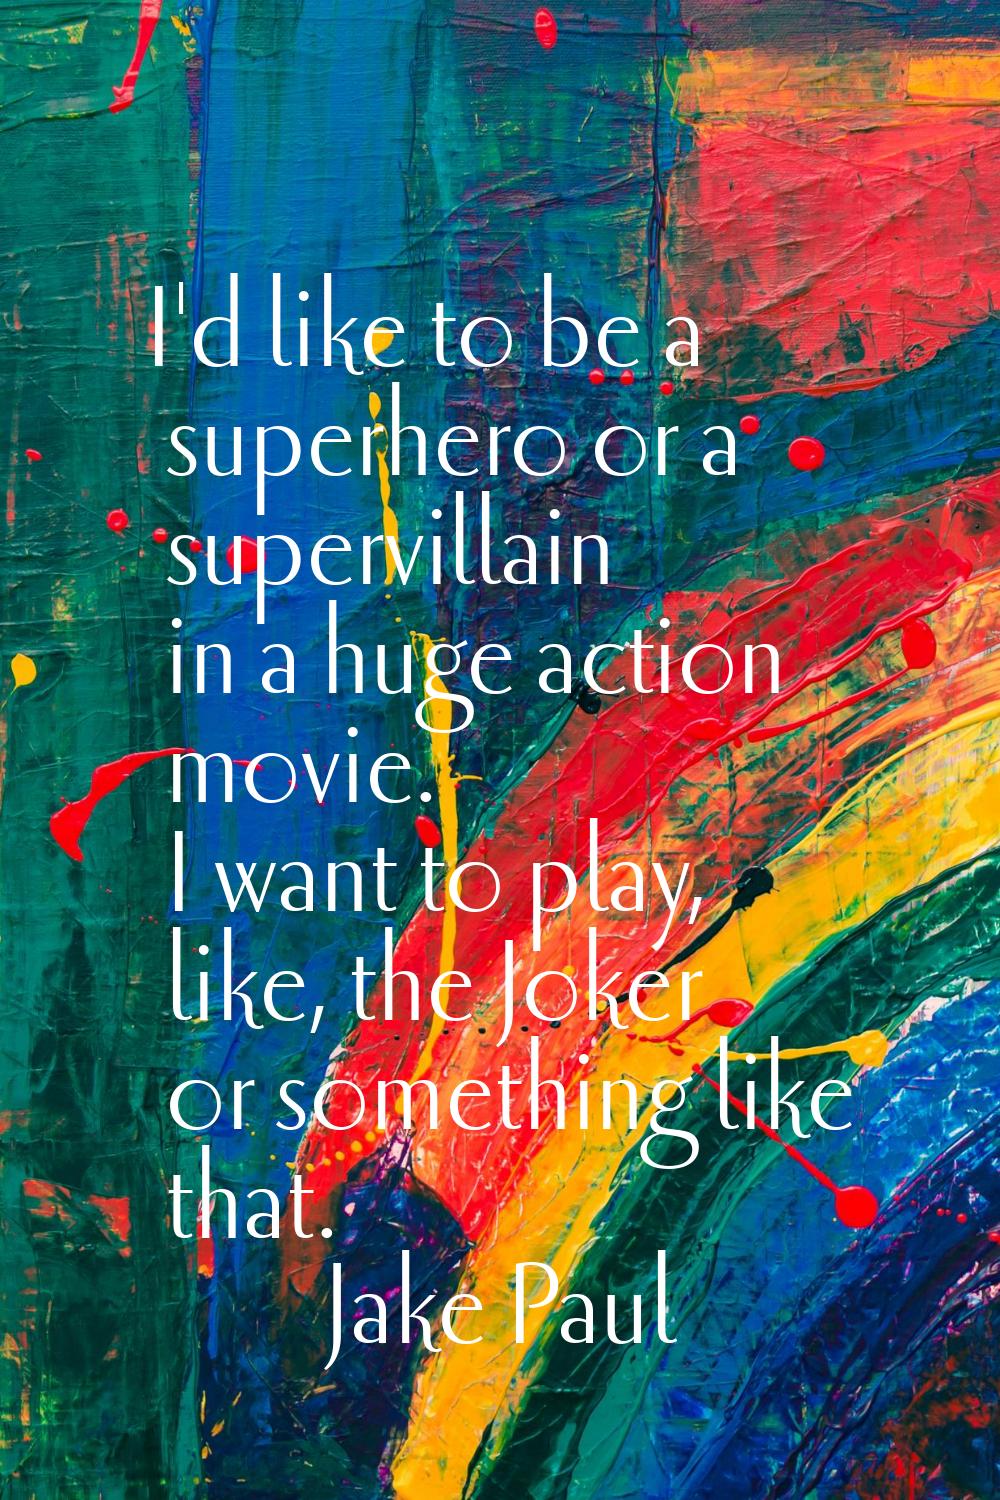 I'd like to be a superhero or a supervillain in a huge action movie. I want to play, like, the Joke